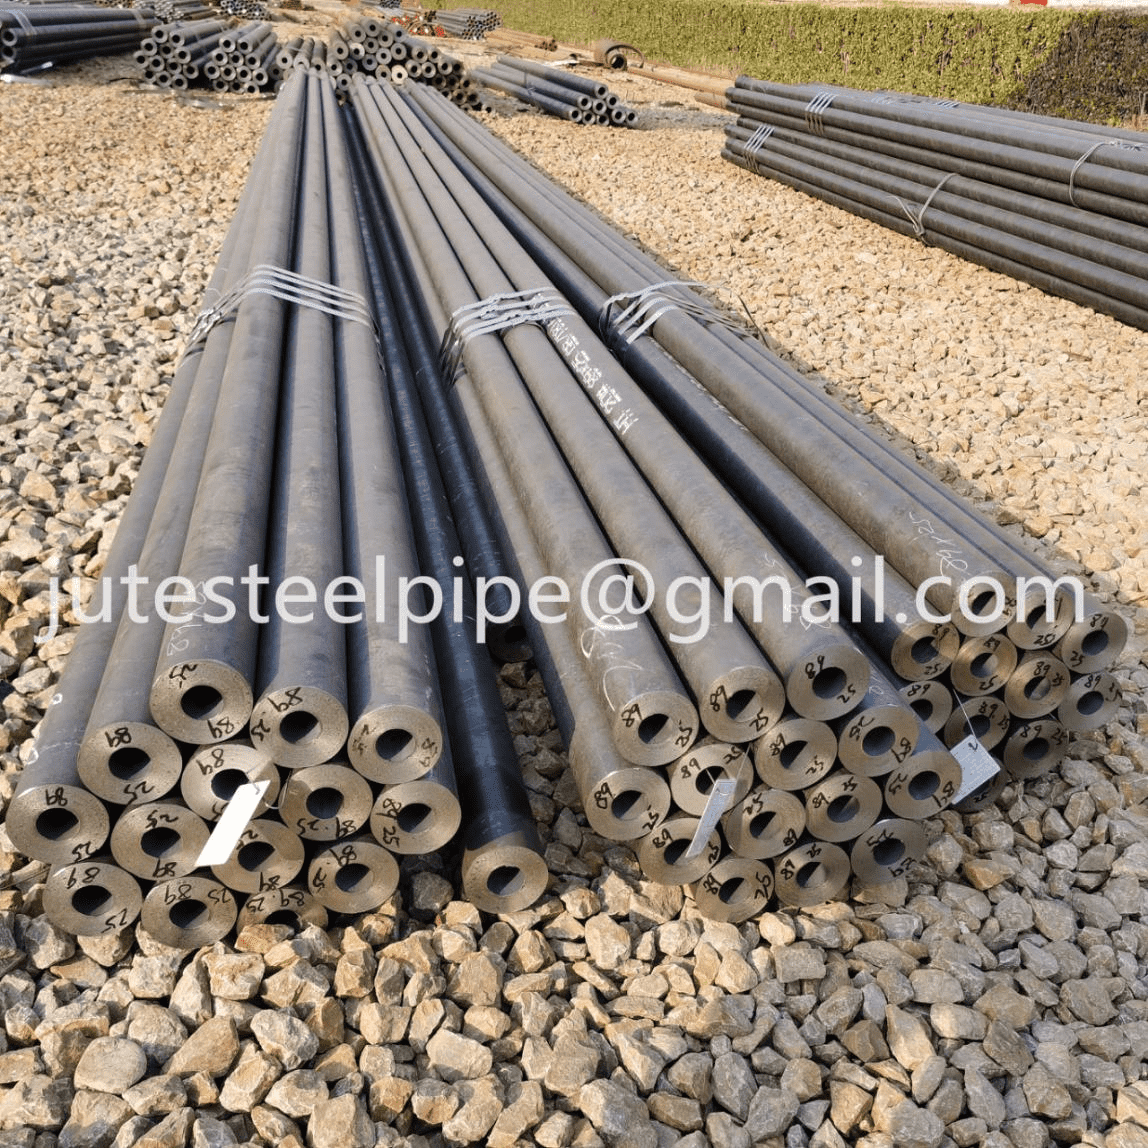 Seamless steel pipe is widely used in each building process